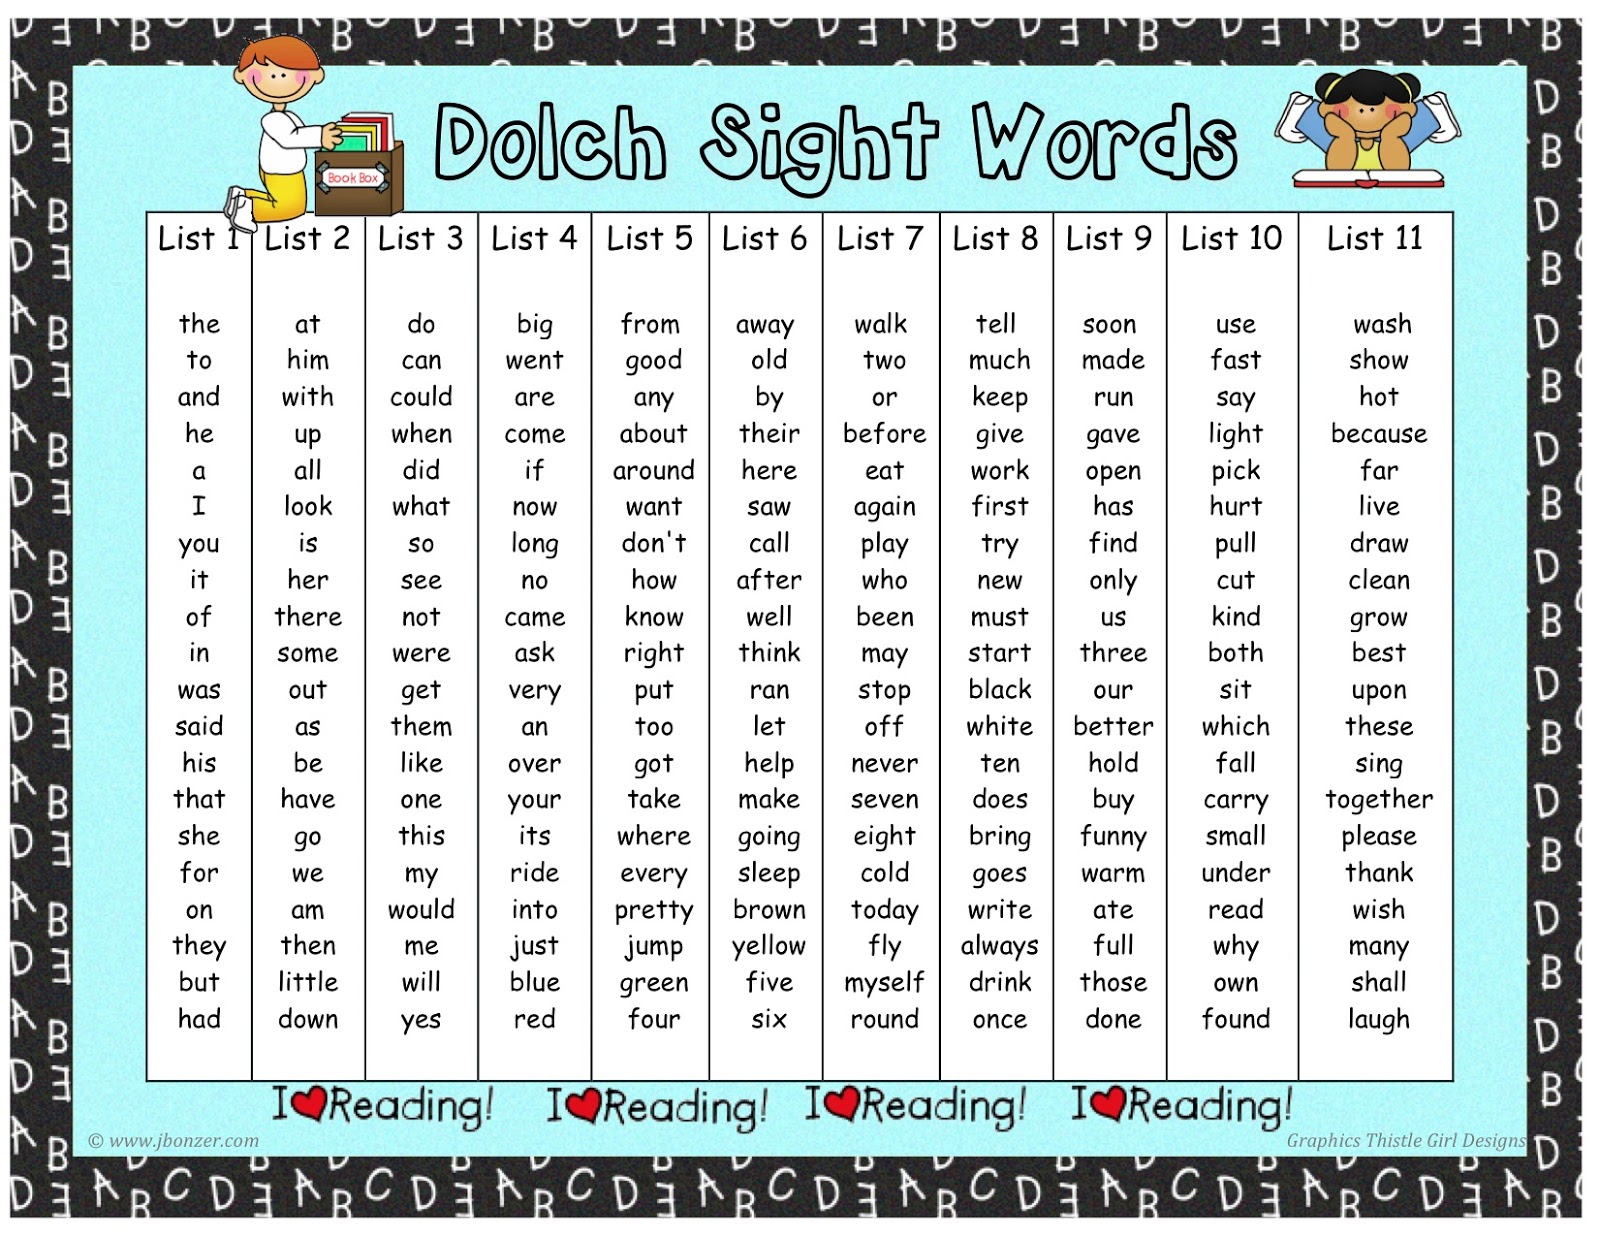 Melinda'sCreative Wishes: Sight Words and Back to School